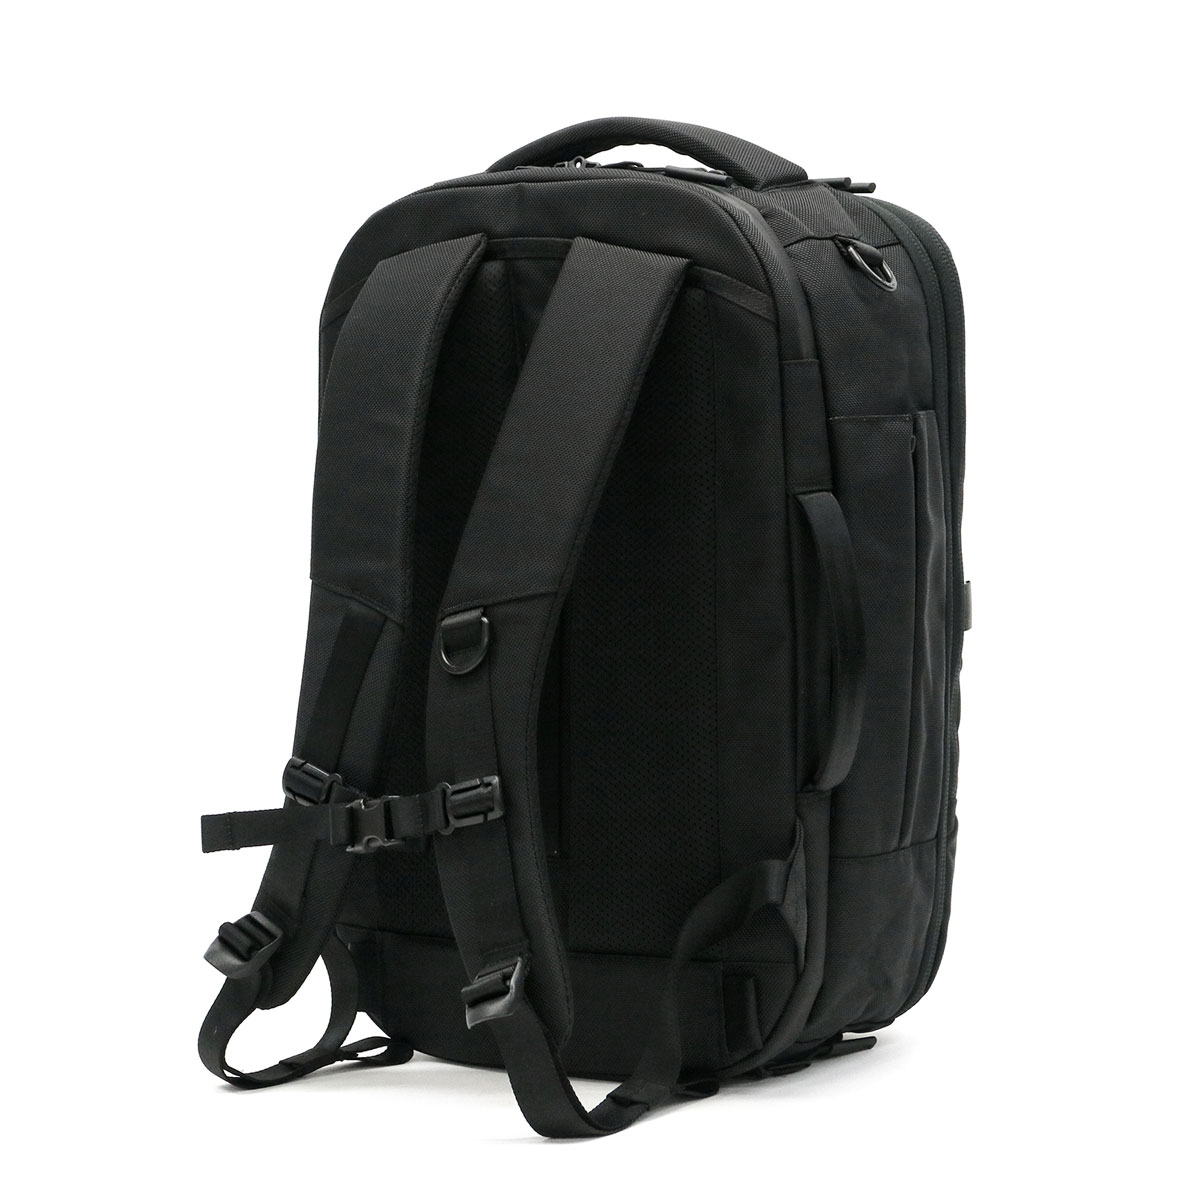 Aer エアー Travel Pack 2 Small バックパック 28L｜【正規販売店